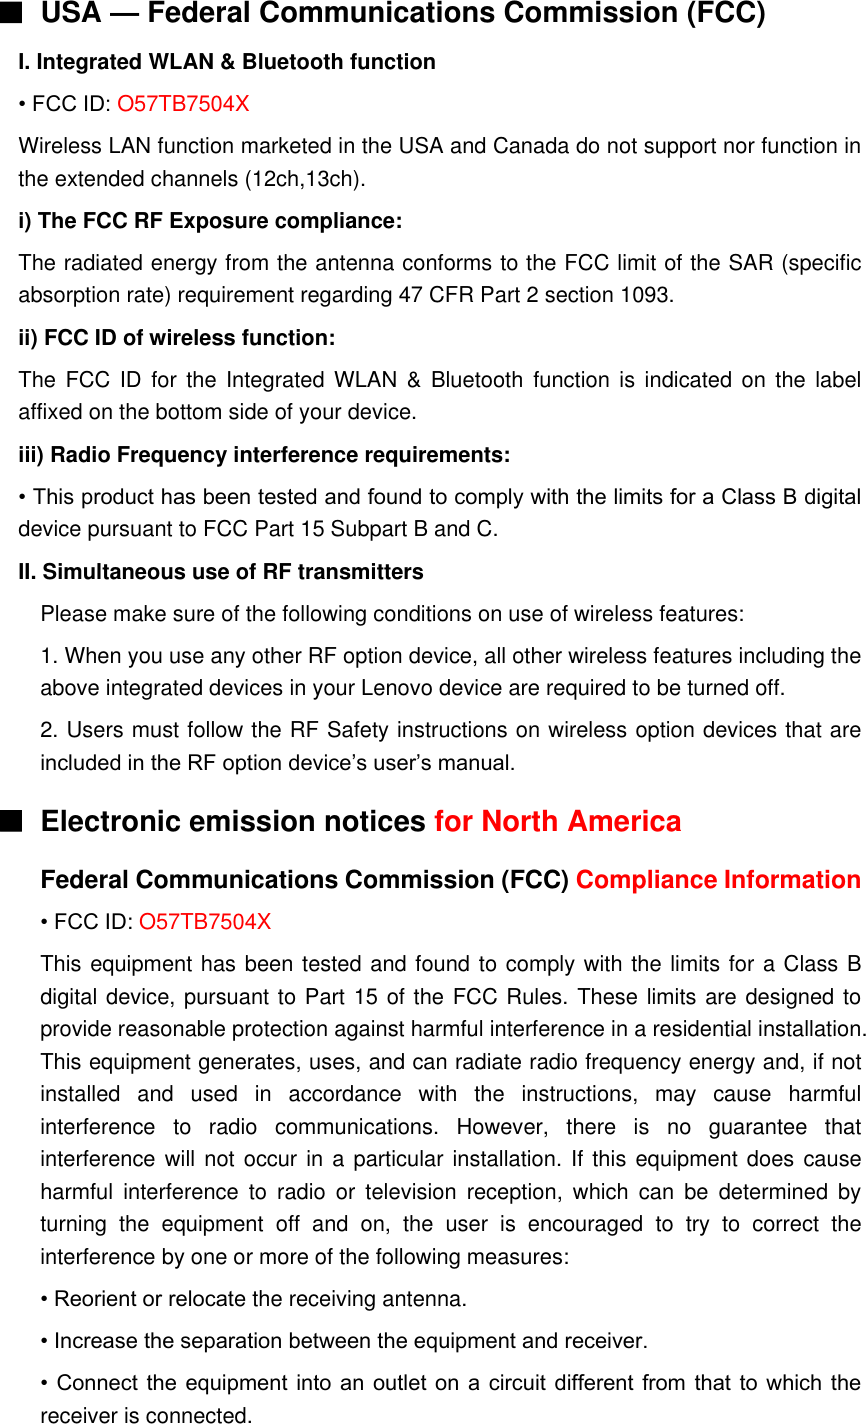 ■ USA — Federal Communications Commission (FCC)   I. Integrated WLAN &amp; Bluetooth function • FCC ID: O57TB7504X Wireless LAN function marketed in the USA and Canada do not support nor function in the extended channels (12ch,13ch). i) The FCC RF Exposure compliance: The radiated energy from the antenna conforms to the FCC limit of the SAR (specific absorption rate) requirement regarding 47 CFR Part 2 section 1093. ii) FCC ID of wireless function: The FCC ID  for  the  Integrated  WLAN  &amp;  Bluetooth function  is  indicated on the label affixed on the bottom side of your device. iii) Radio Frequency interference requirements: • This product has been tested and found to comply with the limits for a Class B digital device pursuant to FCC Part 15 Subpart B and C. II. Simultaneous use of RF transmitters Please make sure of the following conditions on use of wireless features: 1. When you use any other RF option device, all other wireless features including the above integrated devices in your Lenovo device are required to be turned off. 2. Users must follow the RF Safety instructions on wireless option devices that are included in the RF option device’s user’s manual. ■  Electronic emission notices for North America Federal Communications Commission (FCC) Compliance Information • FCC ID: O57TB7504X This equipment has been tested and found to comply with the limits for a Class B digital device, pursuant to Part 15 of the FCC Rules. These limits are designed to provide reasonable protection against harmful interference in a residential installation. This equipment generates, uses, and can radiate radio frequency energy and, if not installed  and  used  in  accordance  with  the  instructions,  may  cause  harmful interference  to  radio  communications.  However,  there  is  no  guarantee  that interference will not  occur in a  particular installation. If this equipment does cause harmful  interference  to  radio  or  television  reception,  which  can  be  determined  by turning  the  equipment  off  and  on,  the  user  is  encouraged  to  try  to  correct  the interference by one or more of the following measures: • Reorient or relocate the receiving antenna. • Increase the separation between the equipment and receiver. • Connect the equipment into an outlet on a circuit different from that to which the receiver is connected. 